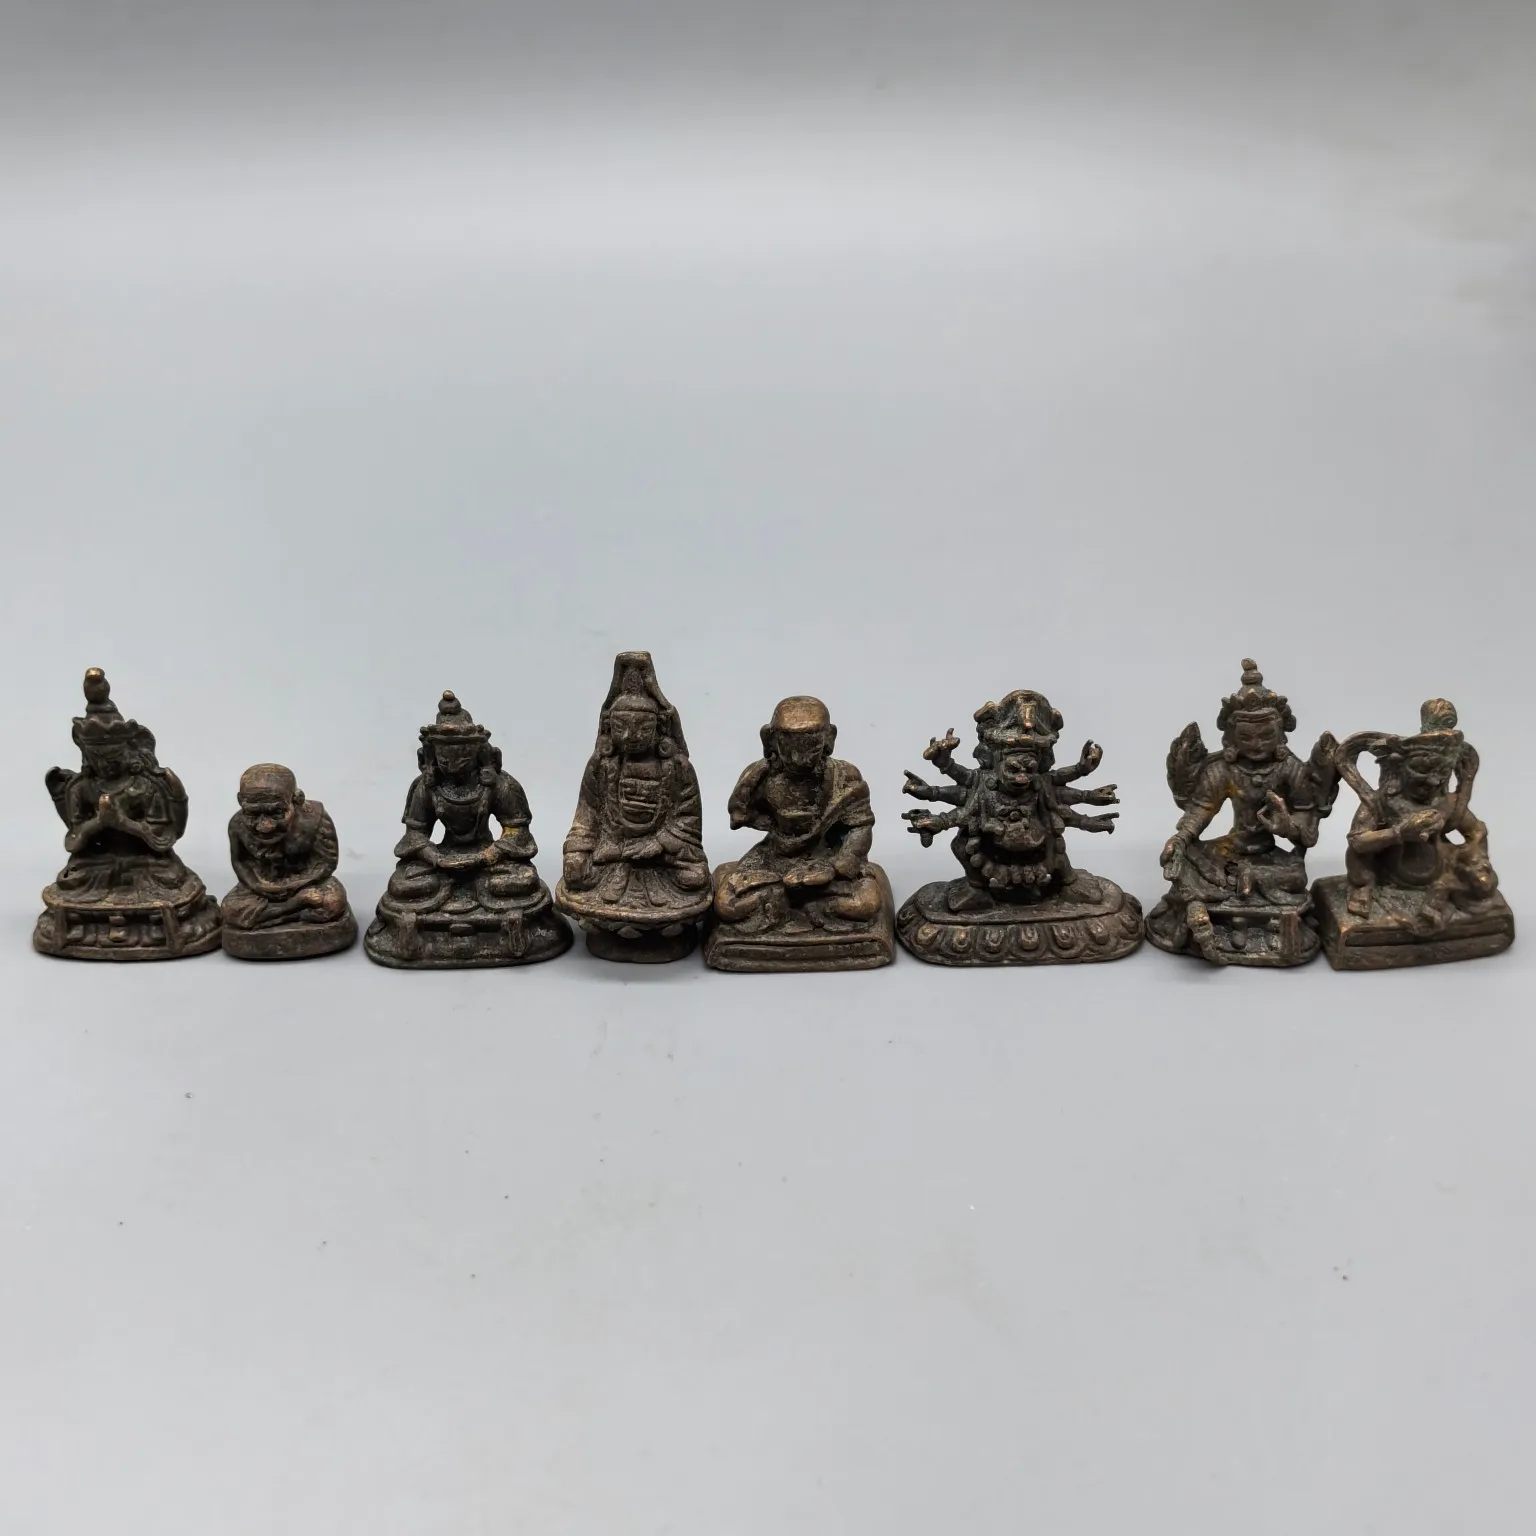 

Furniture Handicrafts Pure Copper Exquisite Buddha Statues Exquisite Workmanship Beautiful Shapes and Blessings for Safety